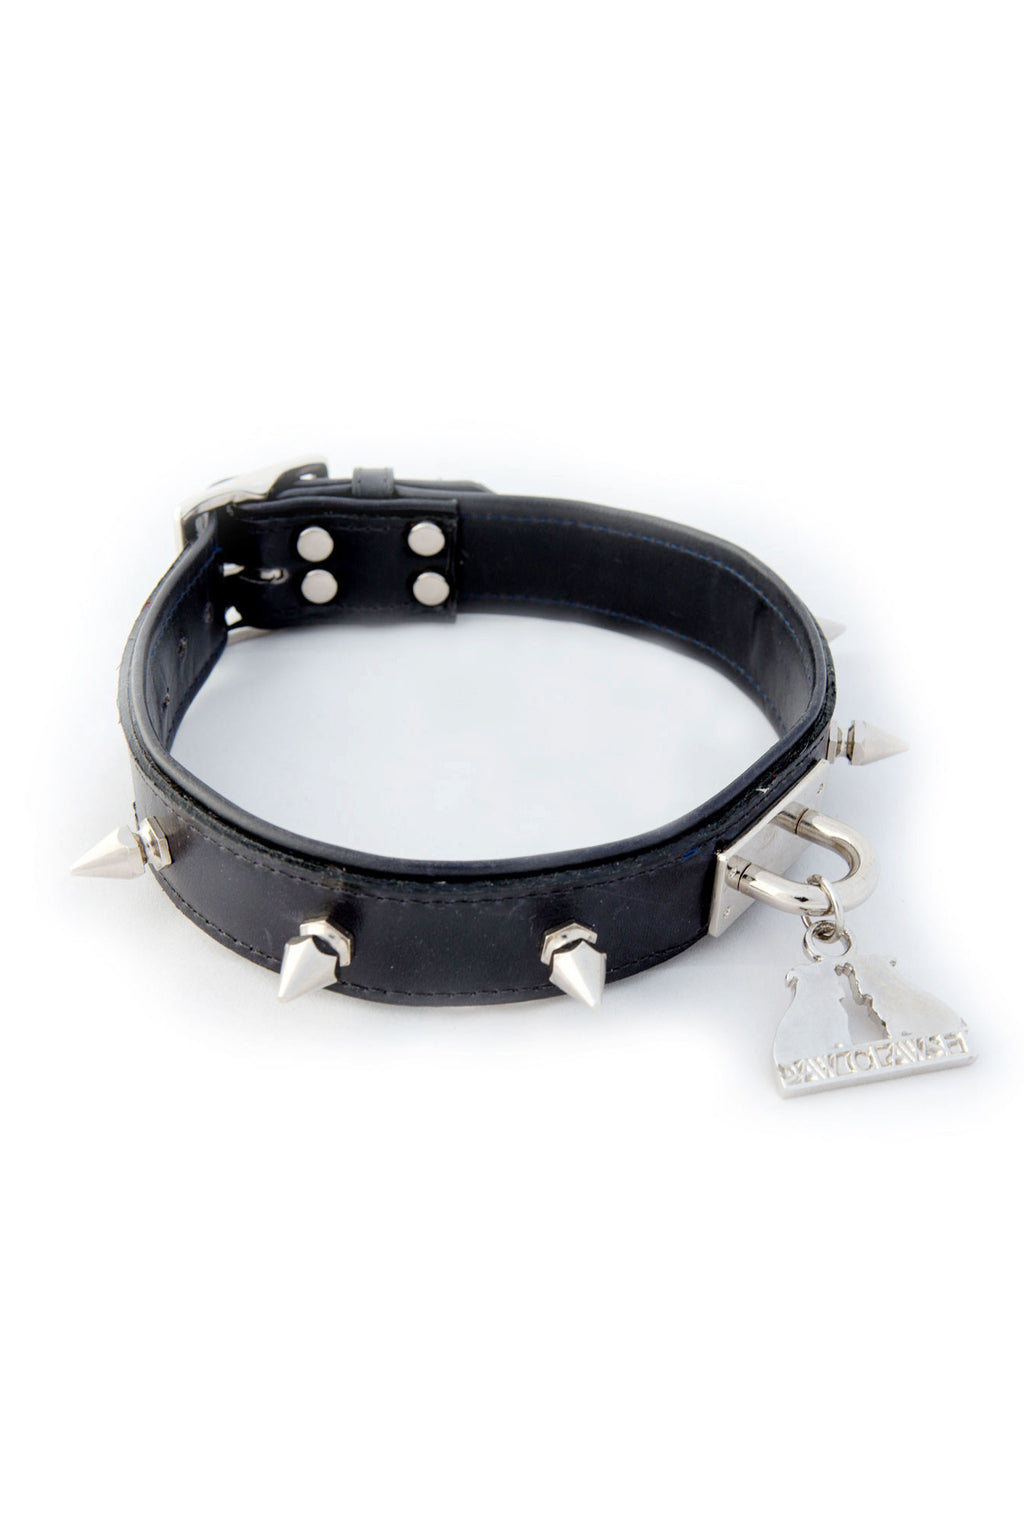 Leather Spiked Rock n' Roll Collar